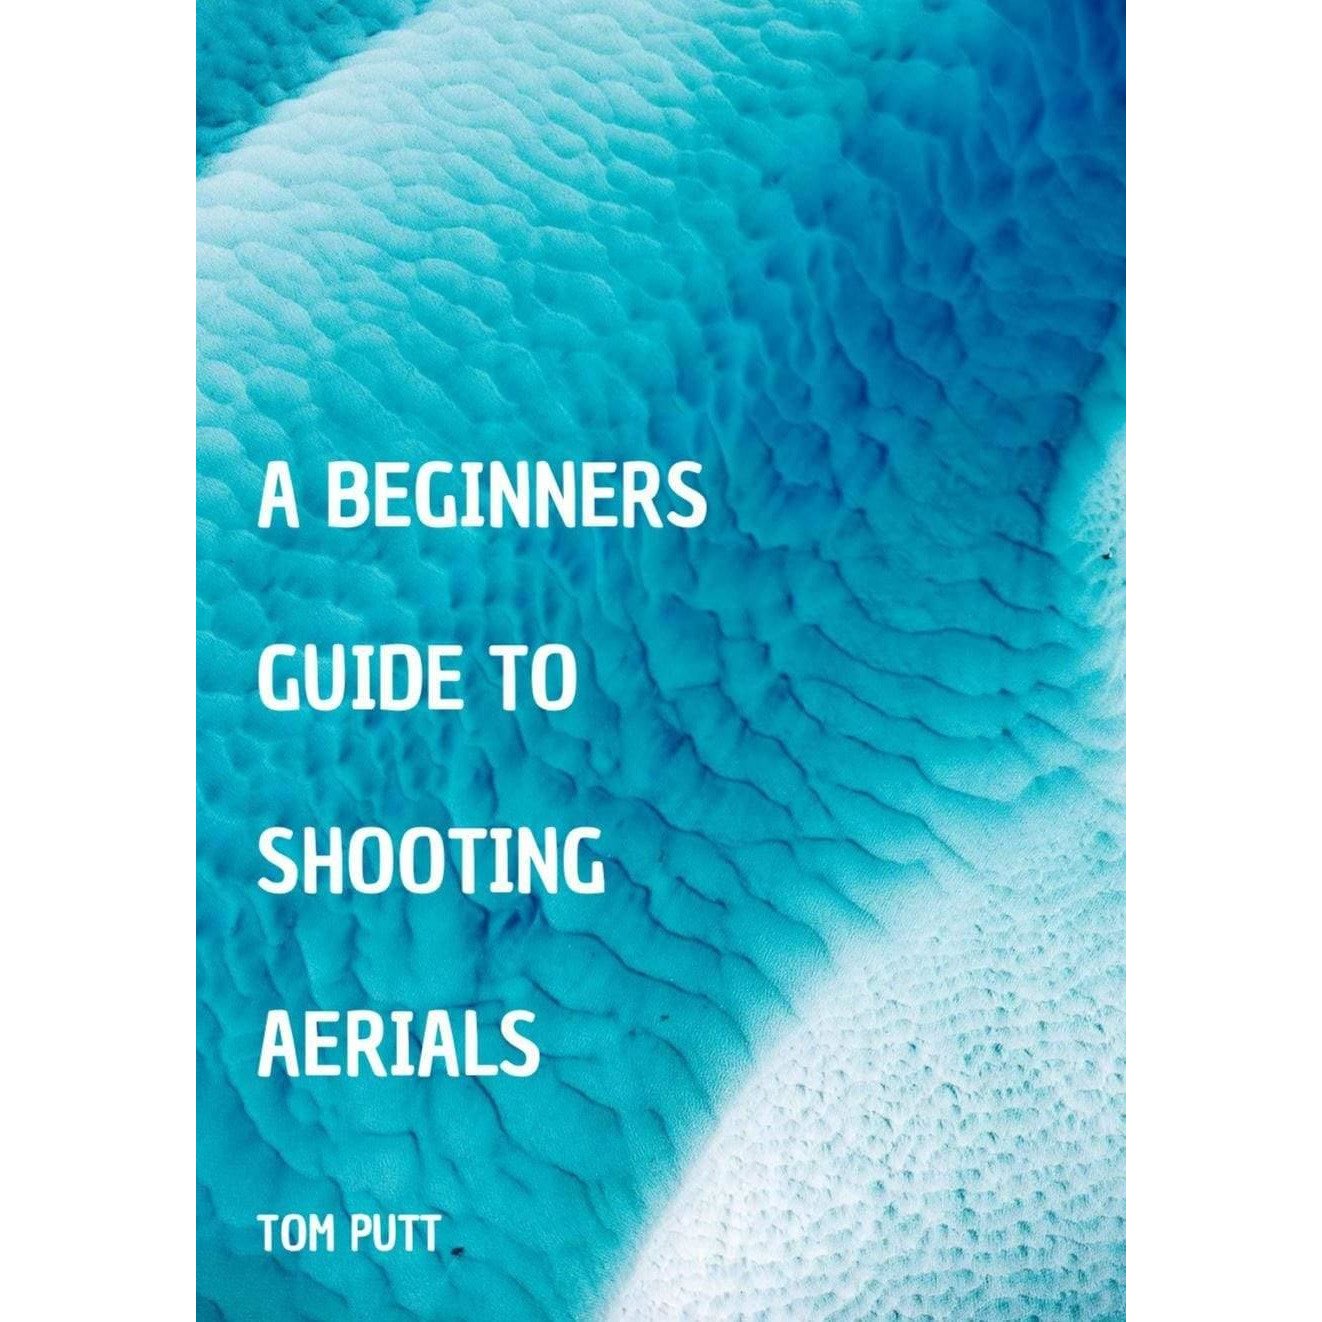 A Beginner's Guide to Shooting Aerials eBook